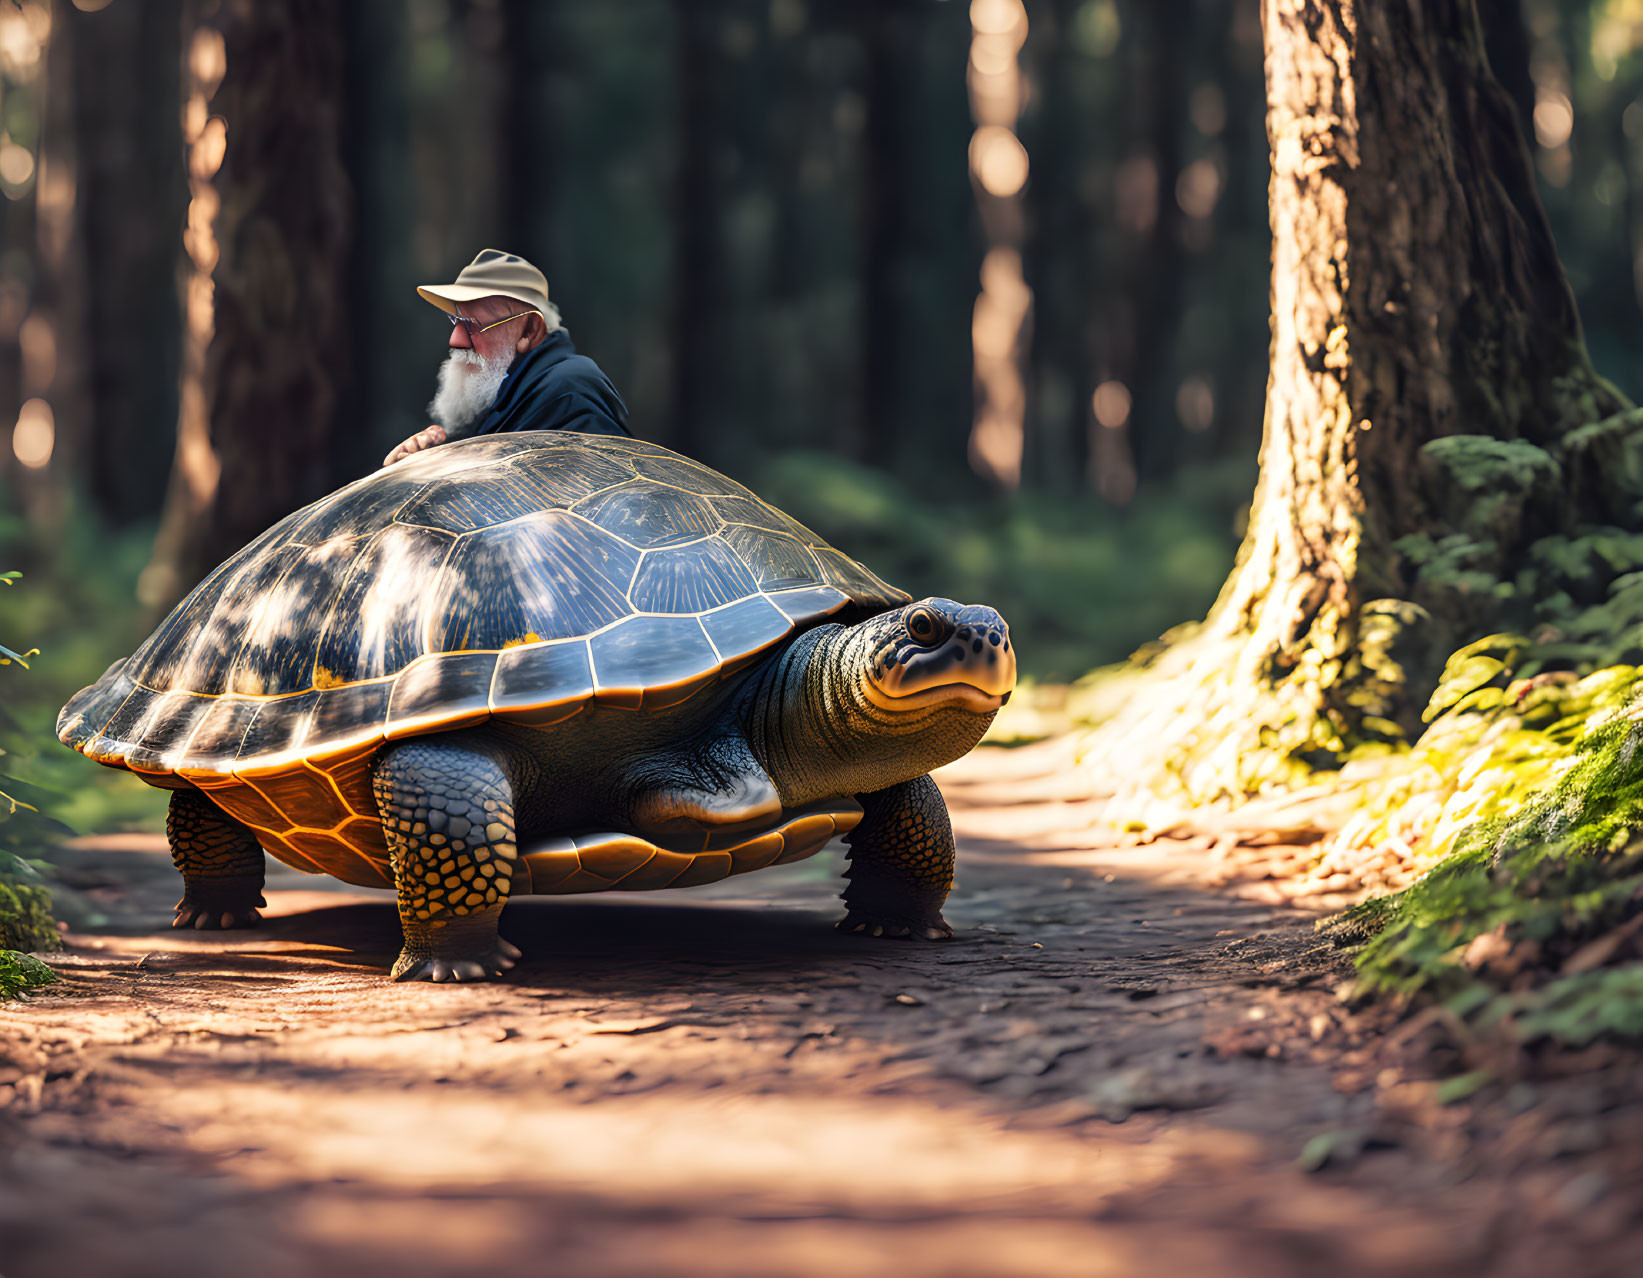 Old man driving a Turtle at the woods